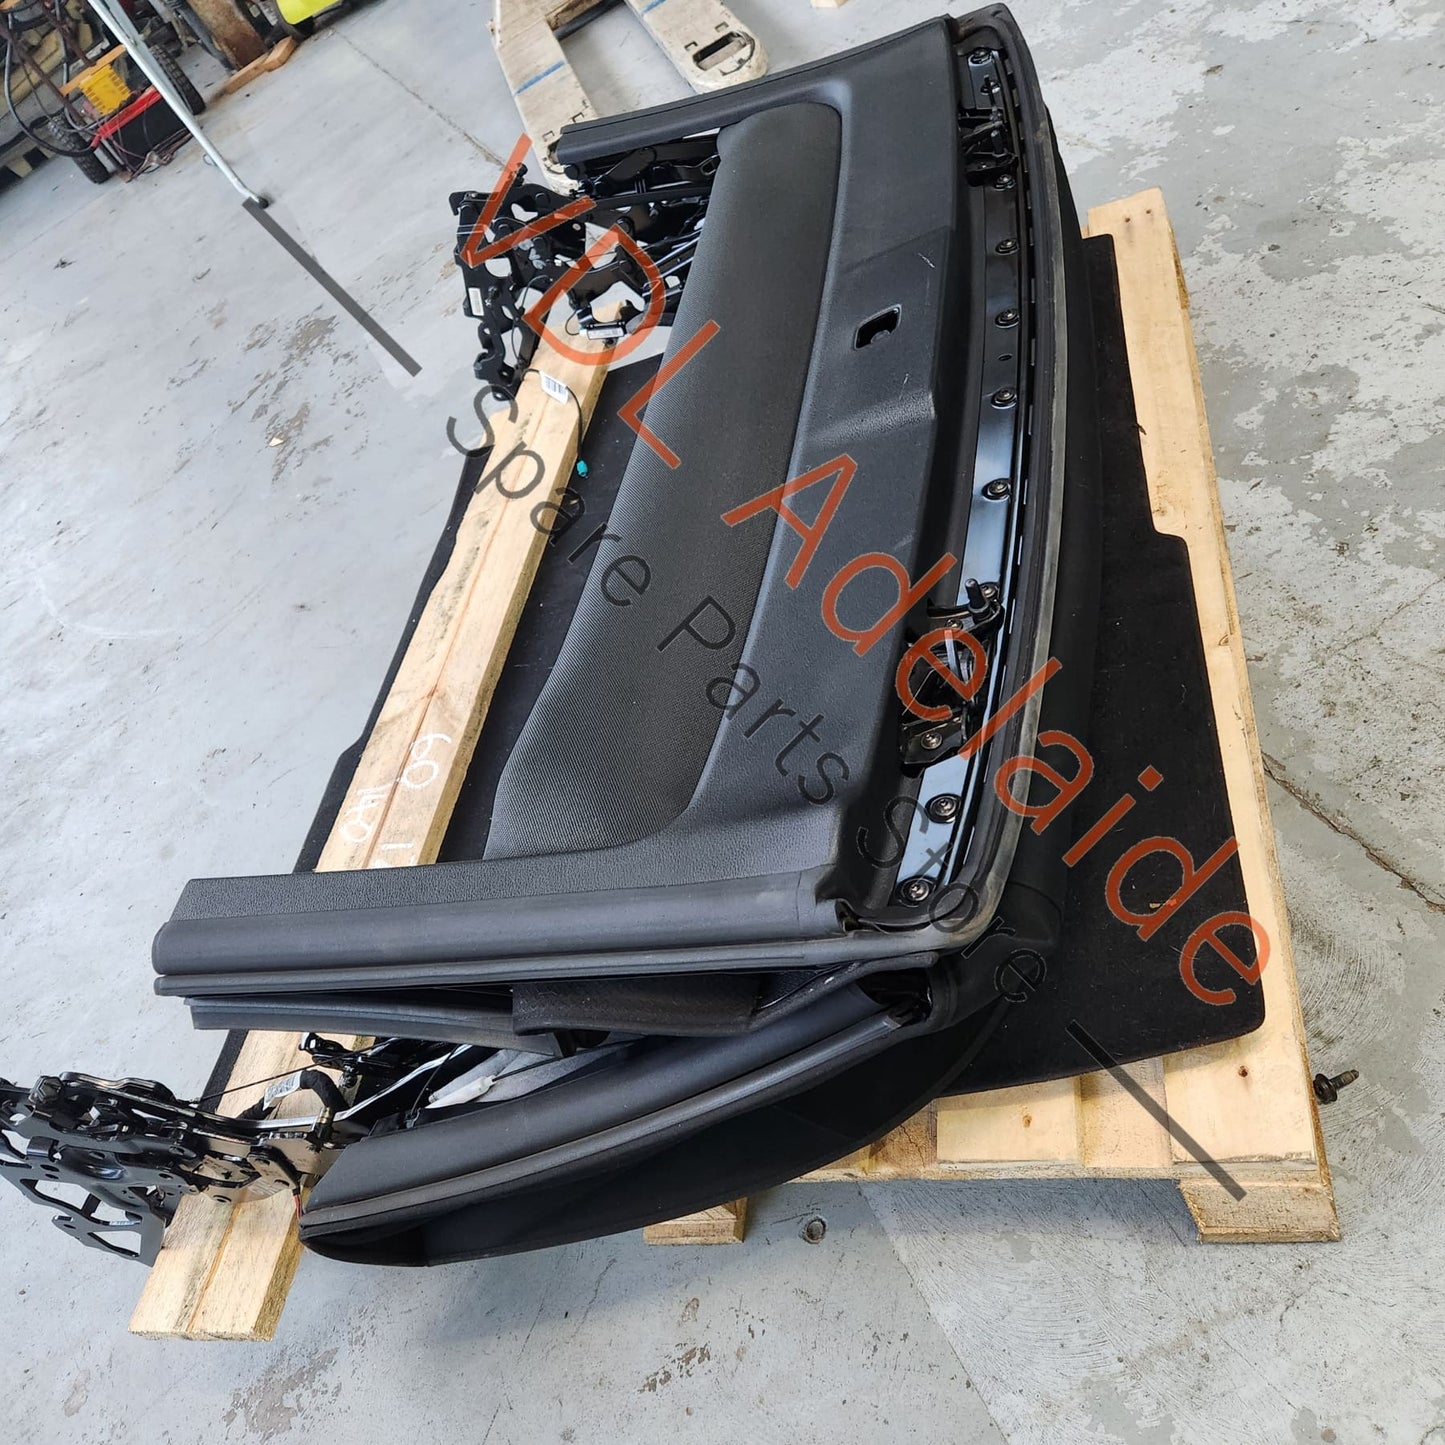 8V7871022C2Y5 8V7871022E2Y5 8V7871791 Audi A3 S3 8V 2013-2020 Complete Convertible Roof frame with fabric 8V7871022C 2Y5